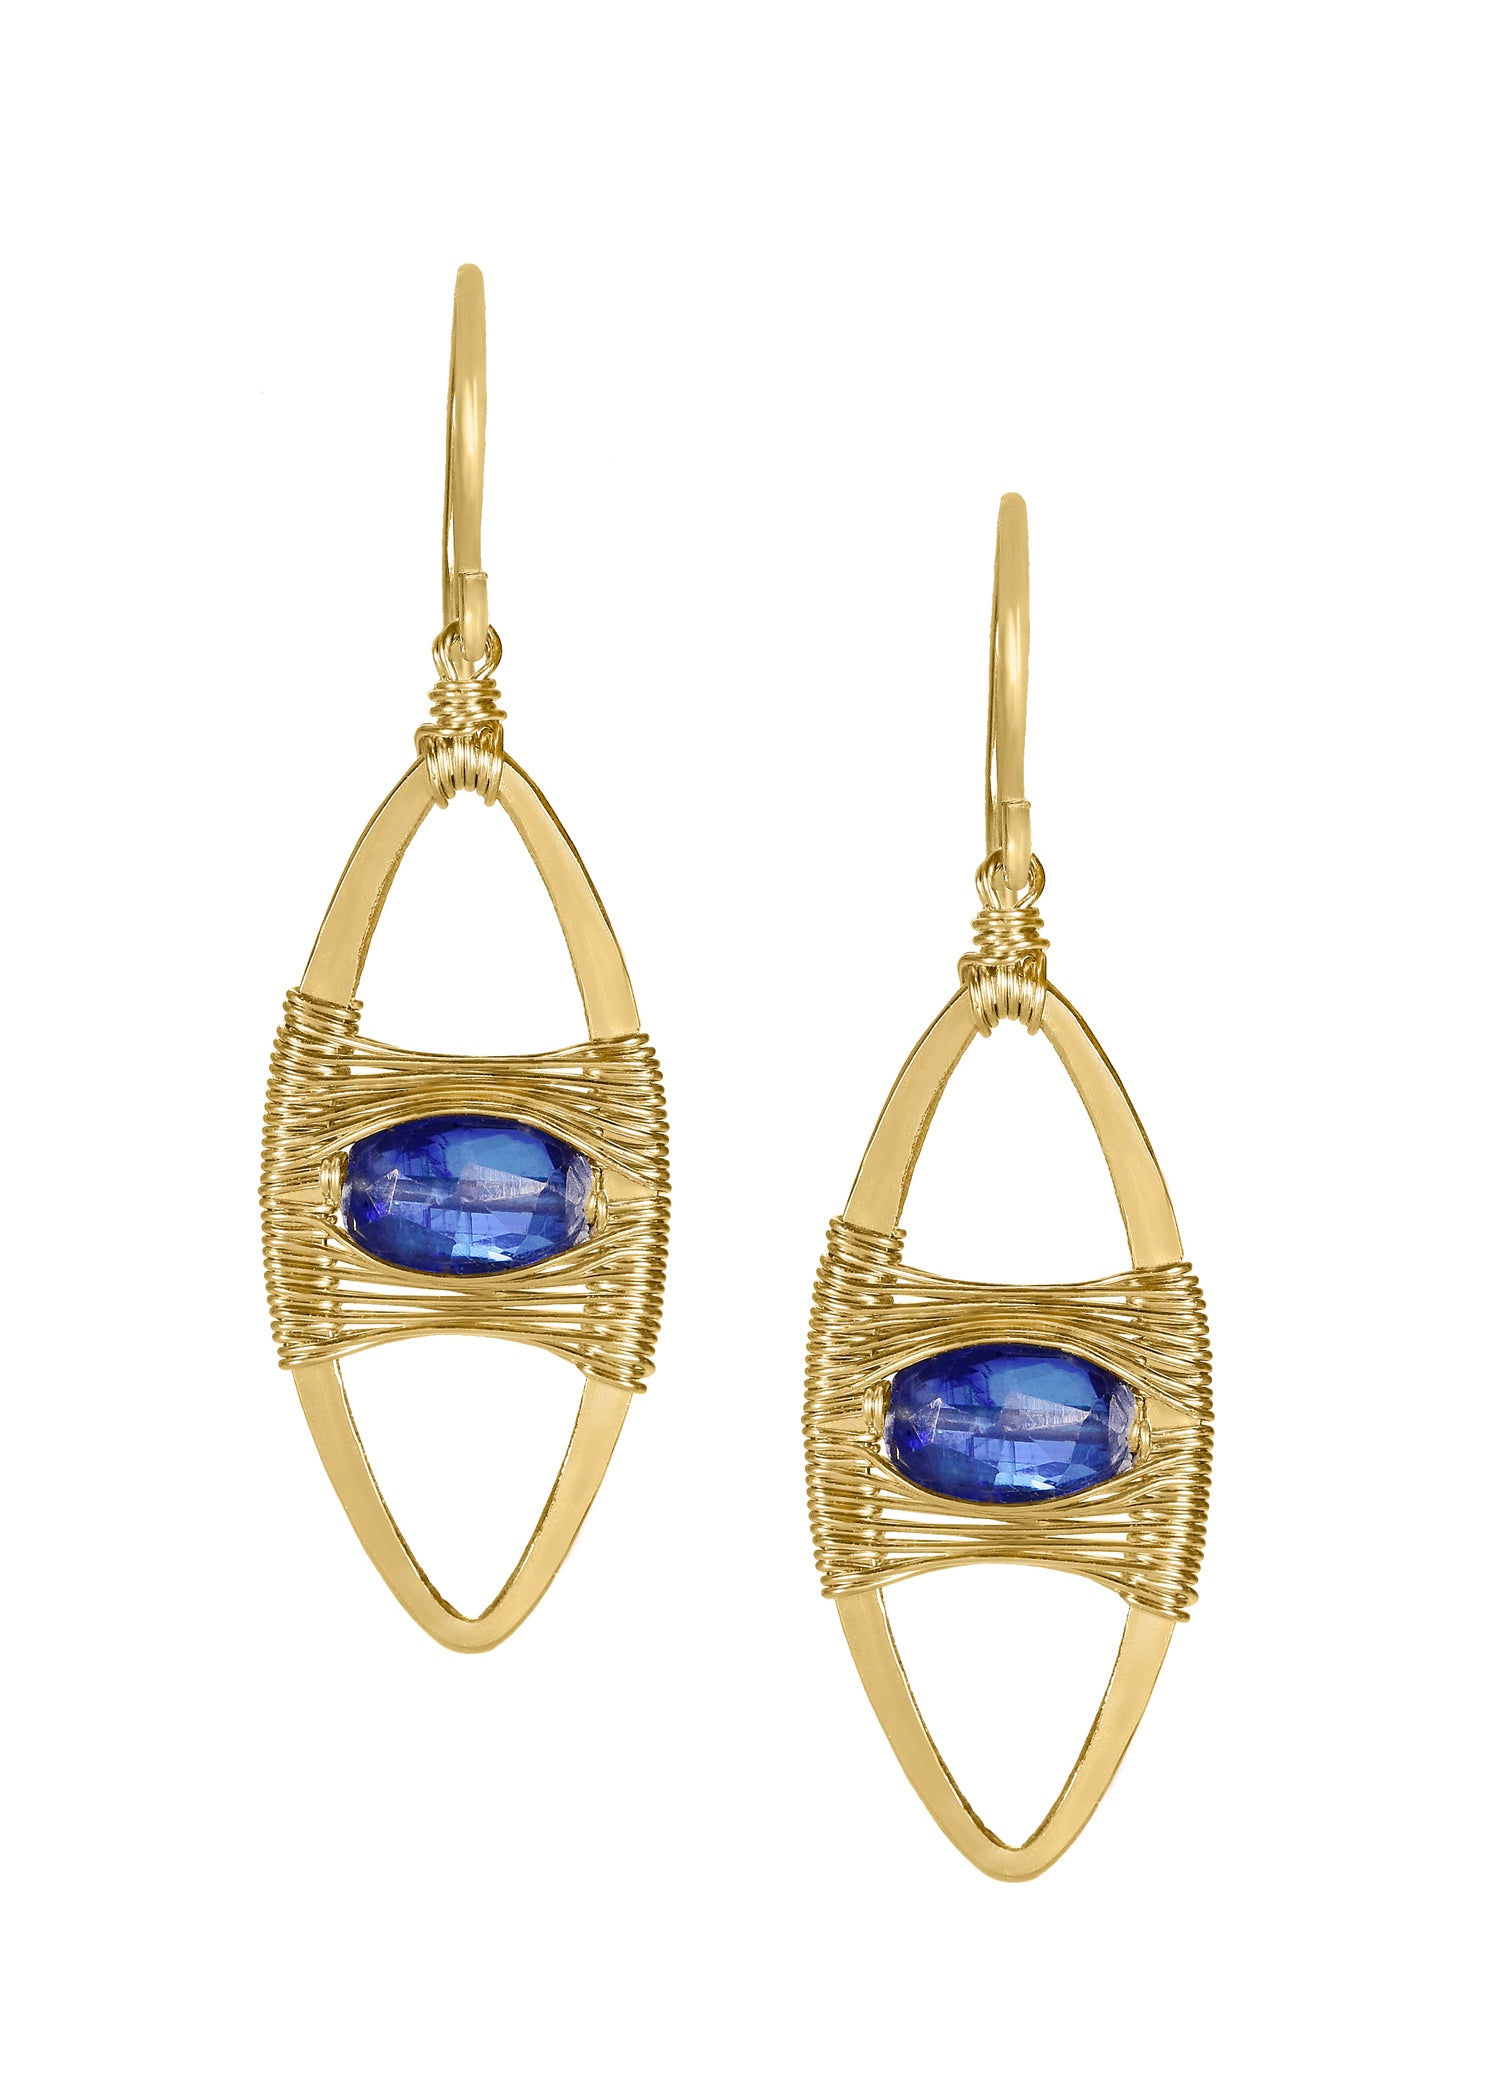 Kyanite 14k gold fill Earrings measure 1-3/8" in length (including the ear wires) and 3/8" in width at the widest point Handmade in our Los Angeles studio